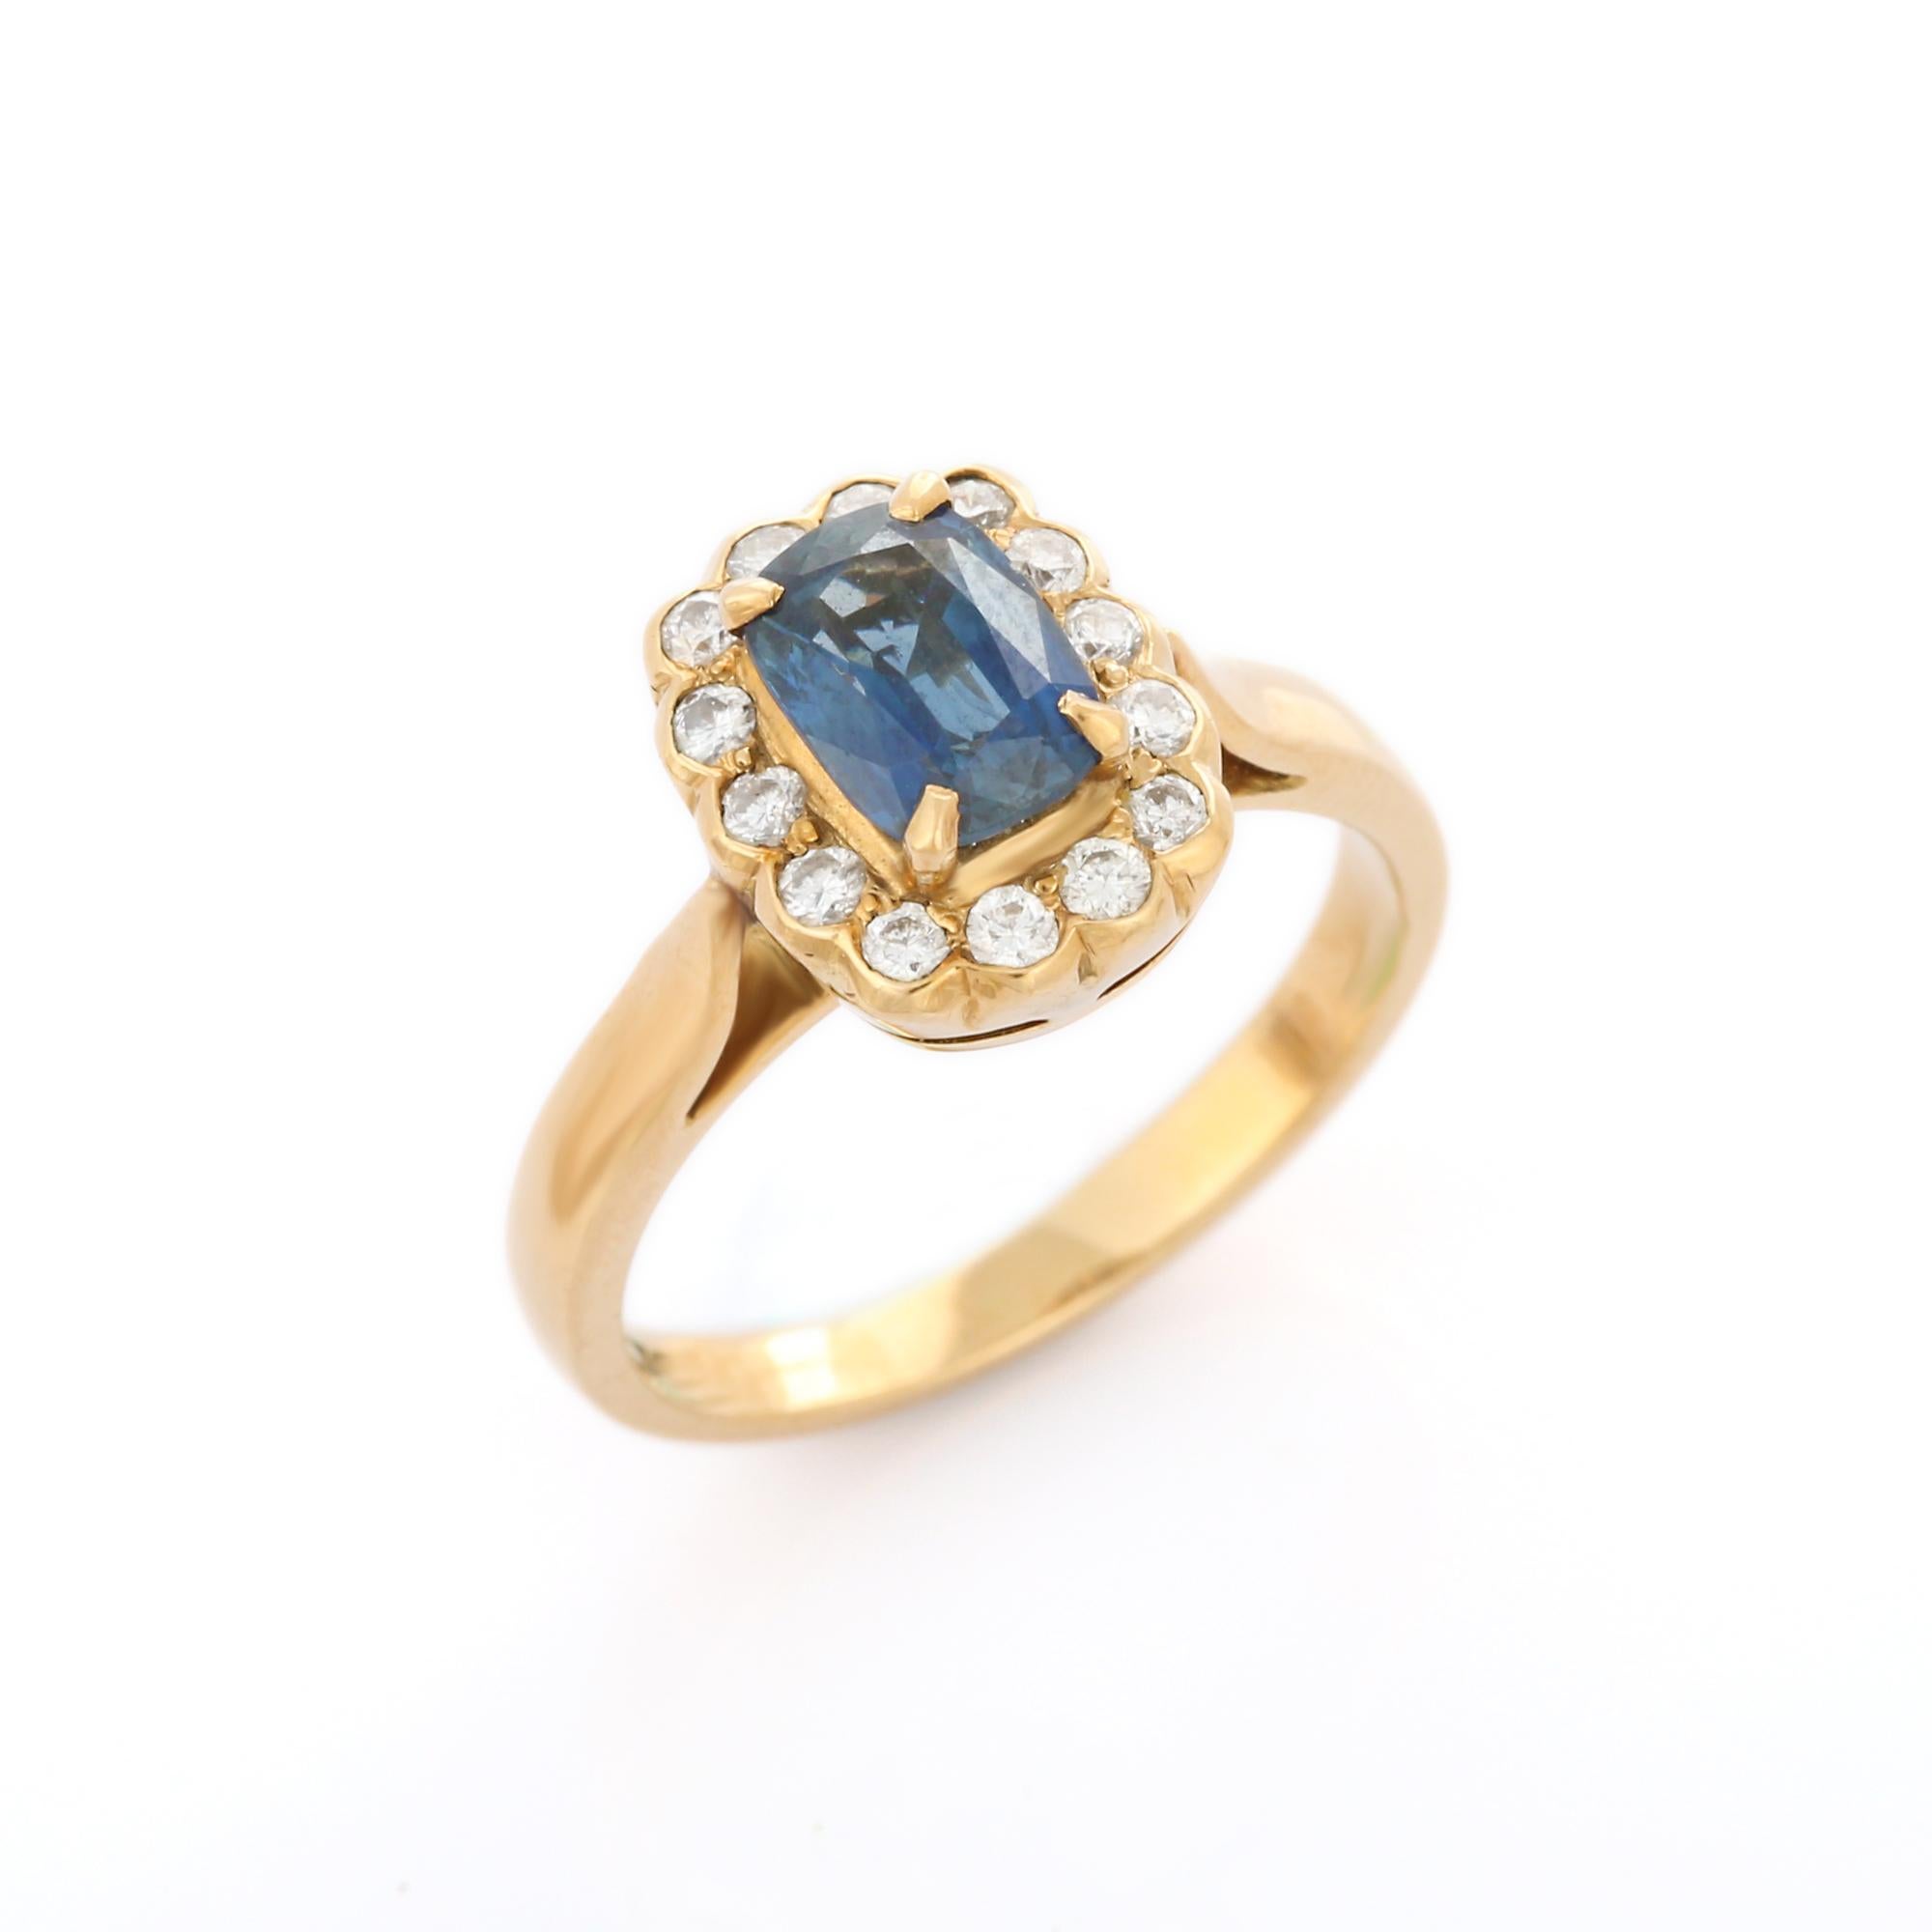 For Sale:  18K Yellow Gold Blue Sapphire Diamond Halo Ring Engagement Ring, Gift for Her 5